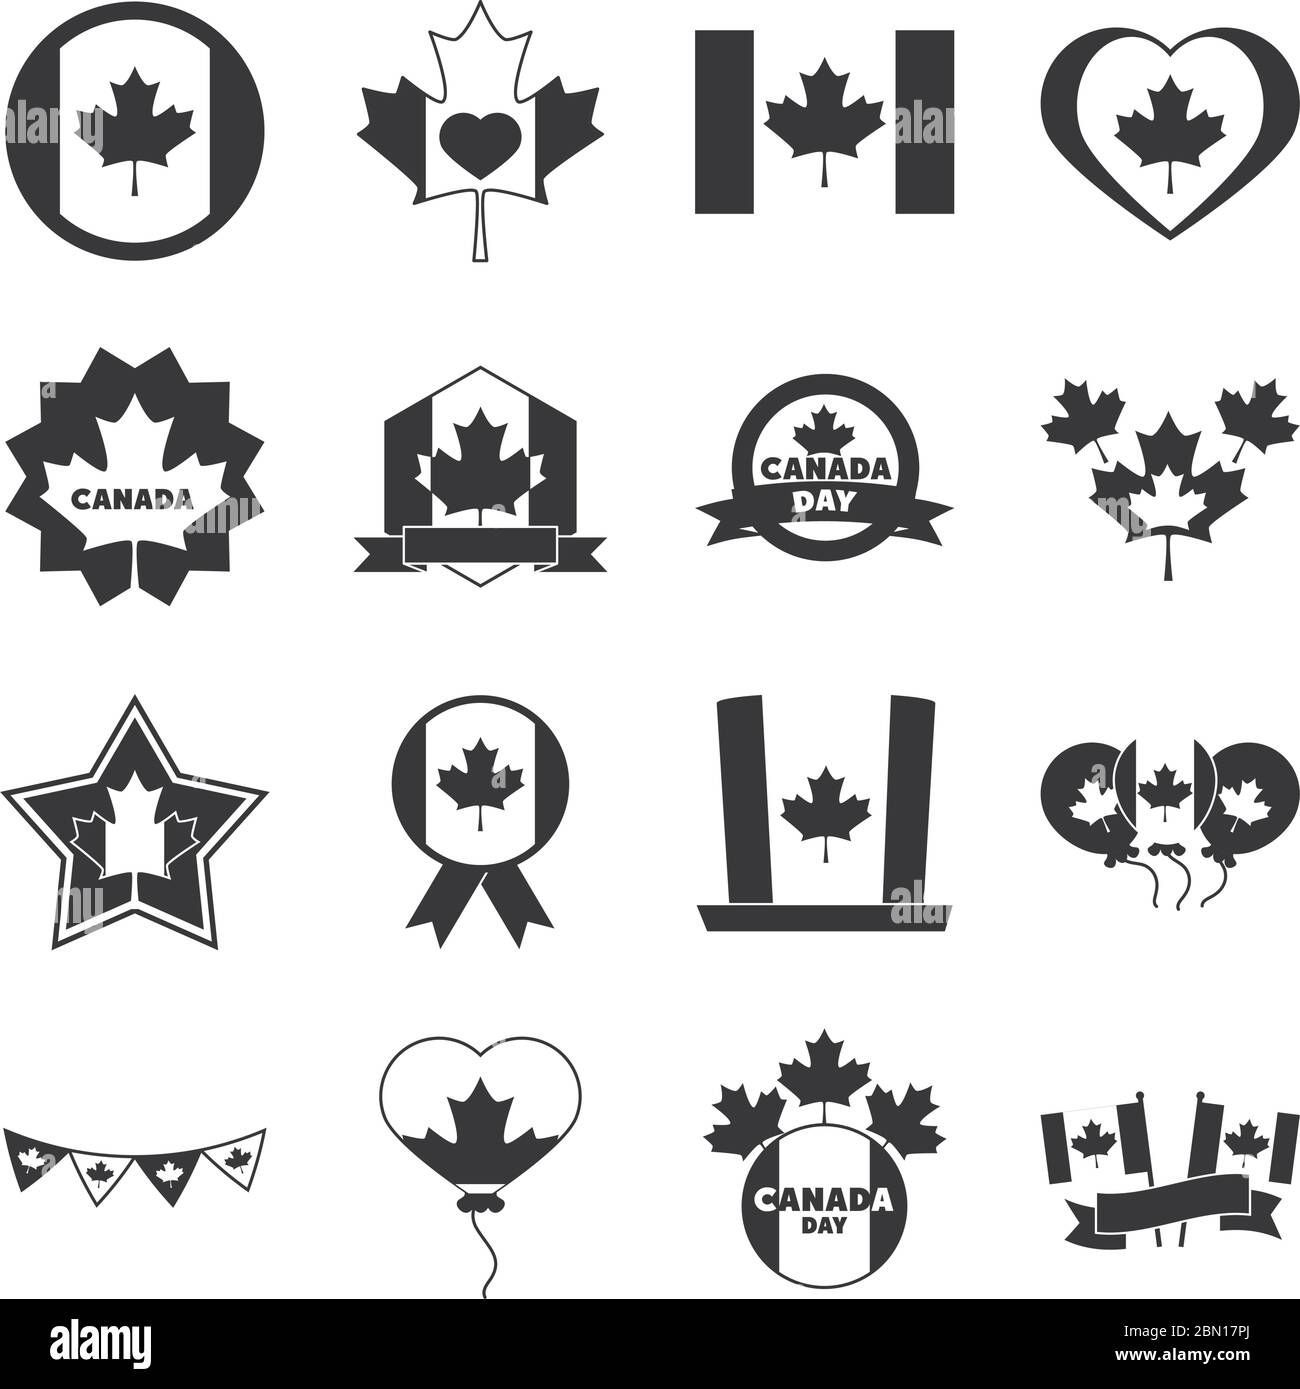 canada day, independence freedom national patriotism celebration icons set vector illustration silhouette style icon Stock Vector